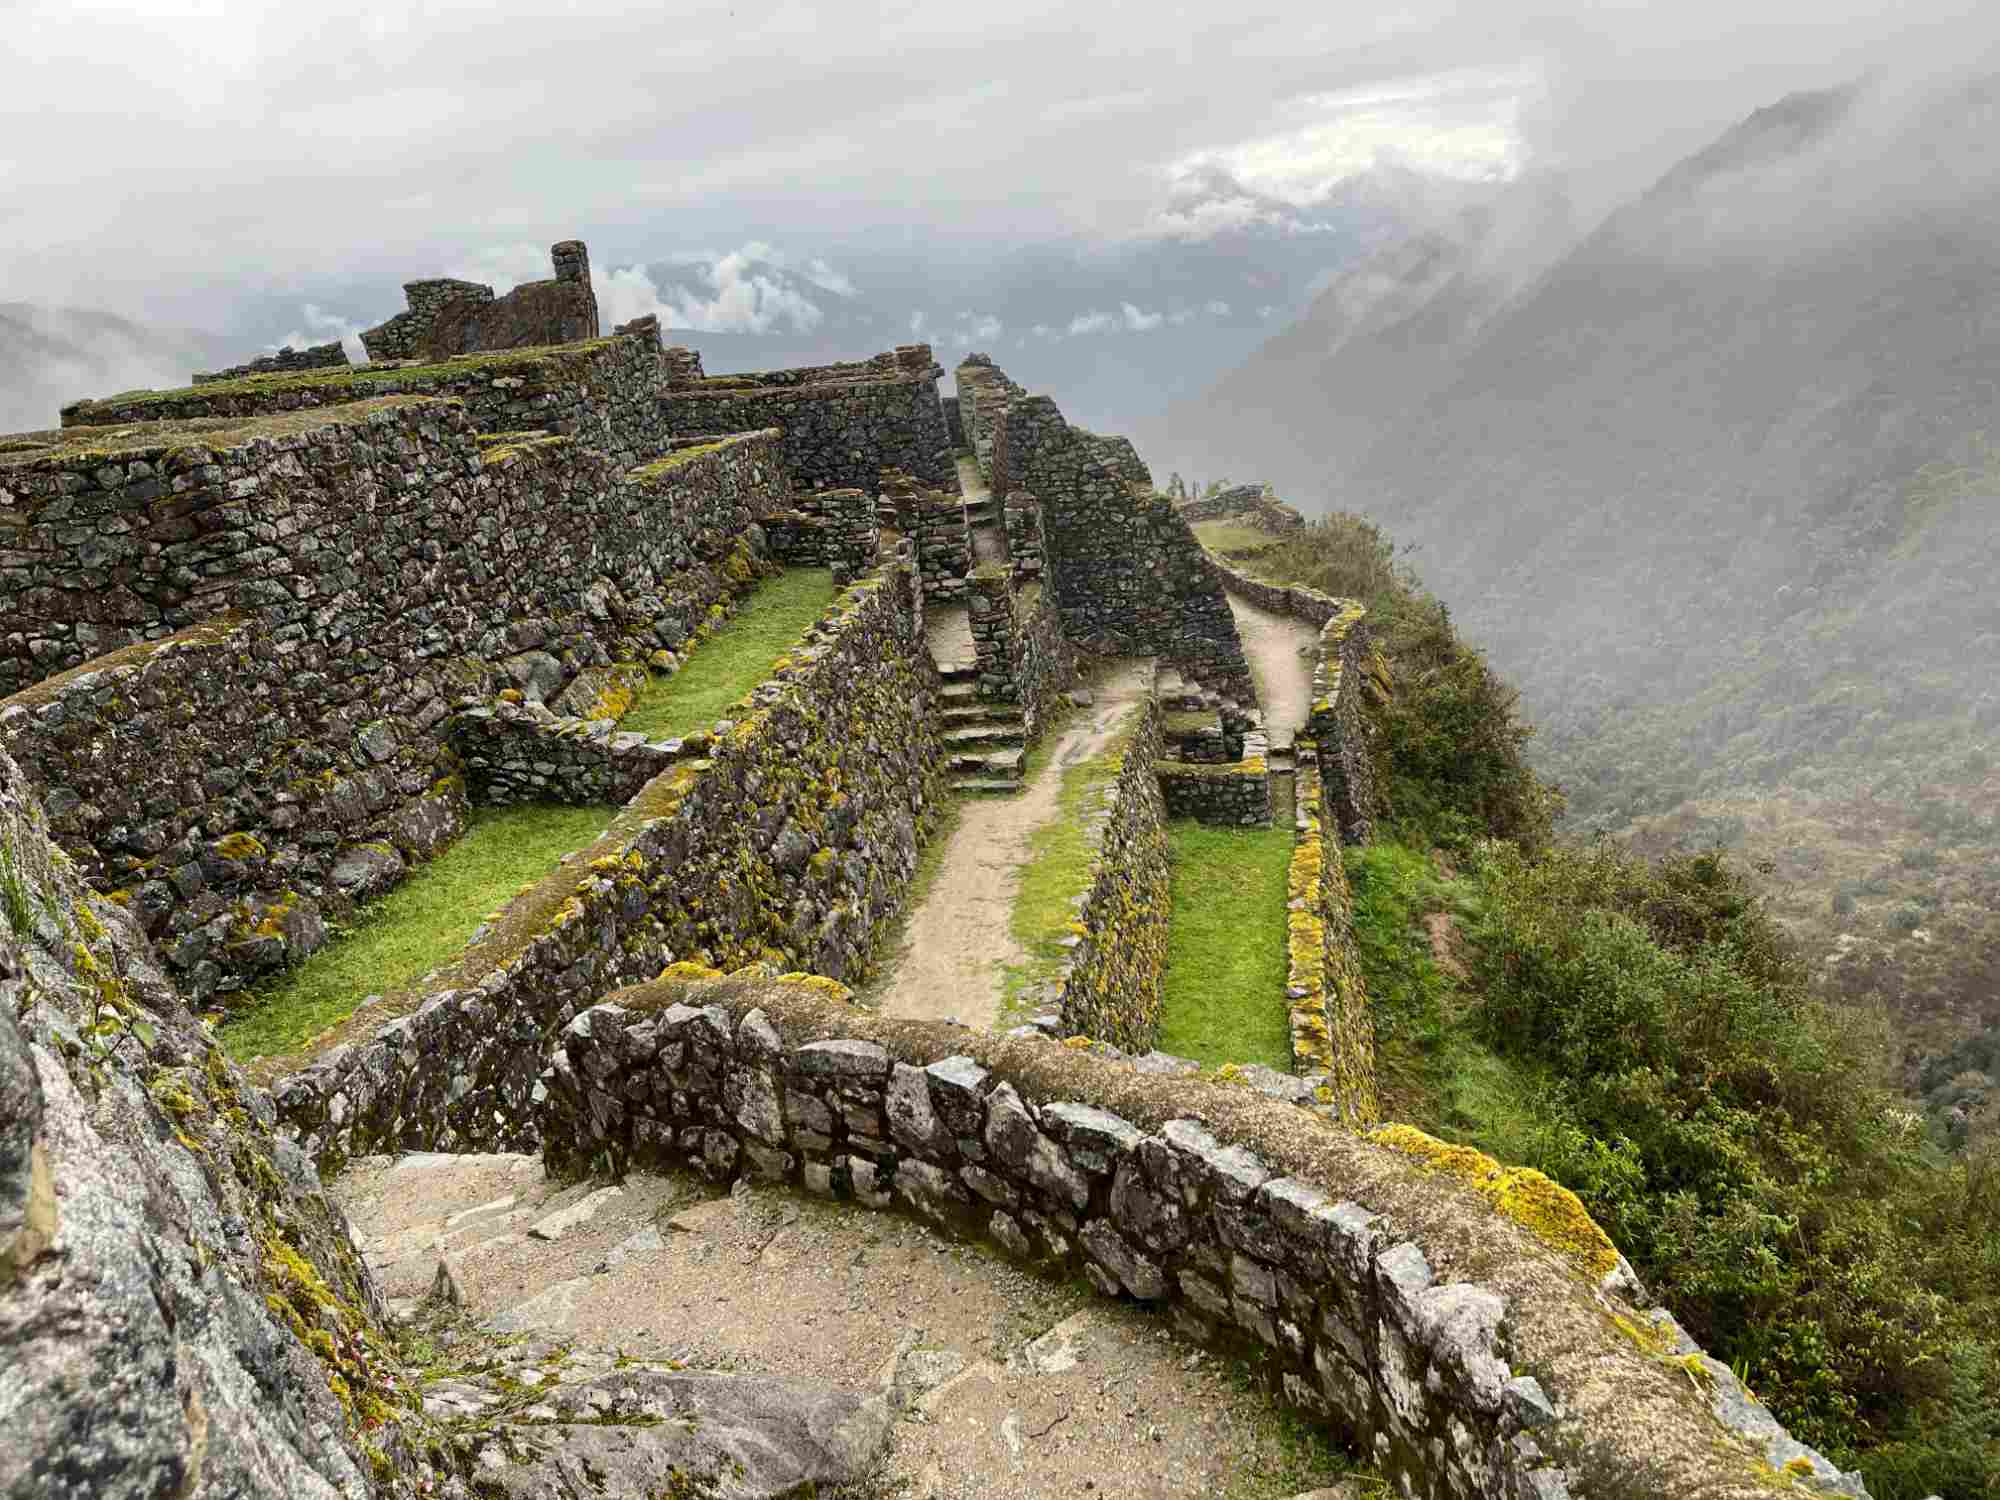 The Inca Trail Tips: 10 Tips to Make Your Trek to Machu Picchu a Success